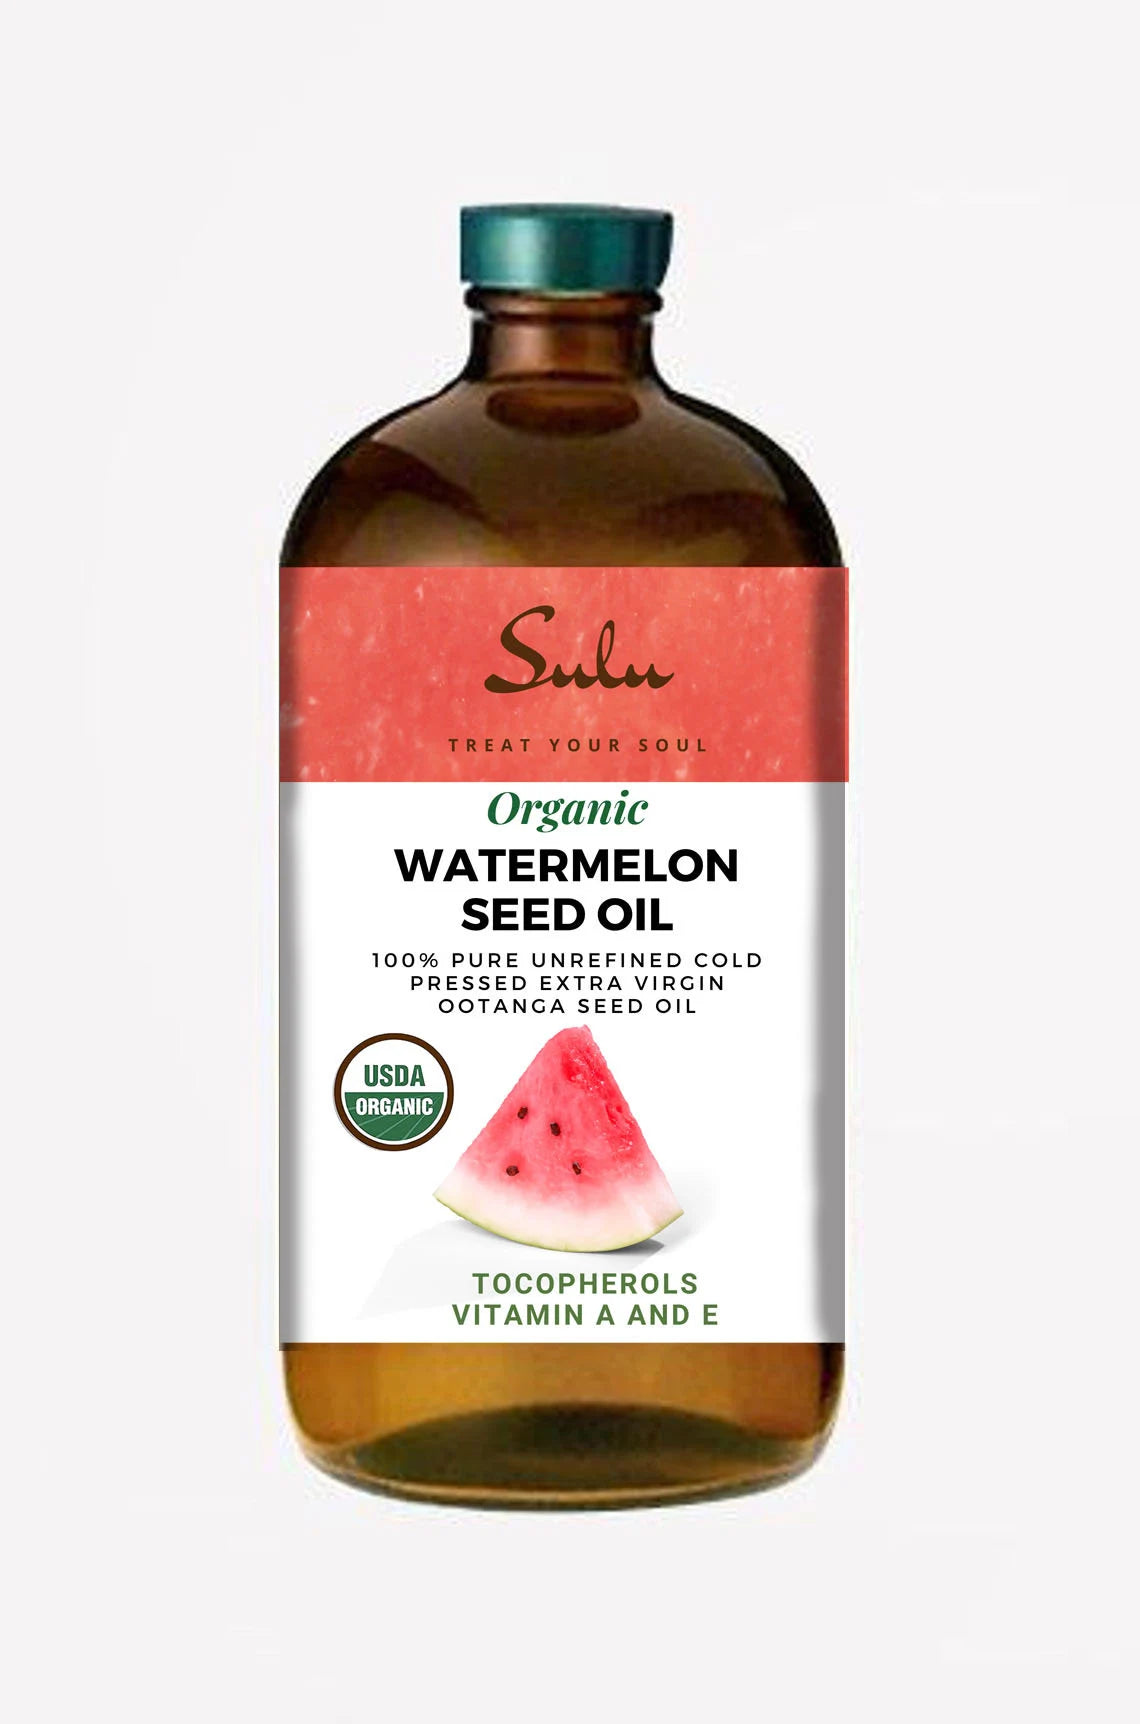 Bottle Watermelon Seed Oil Packaging Natural Stock Photo 2191535019